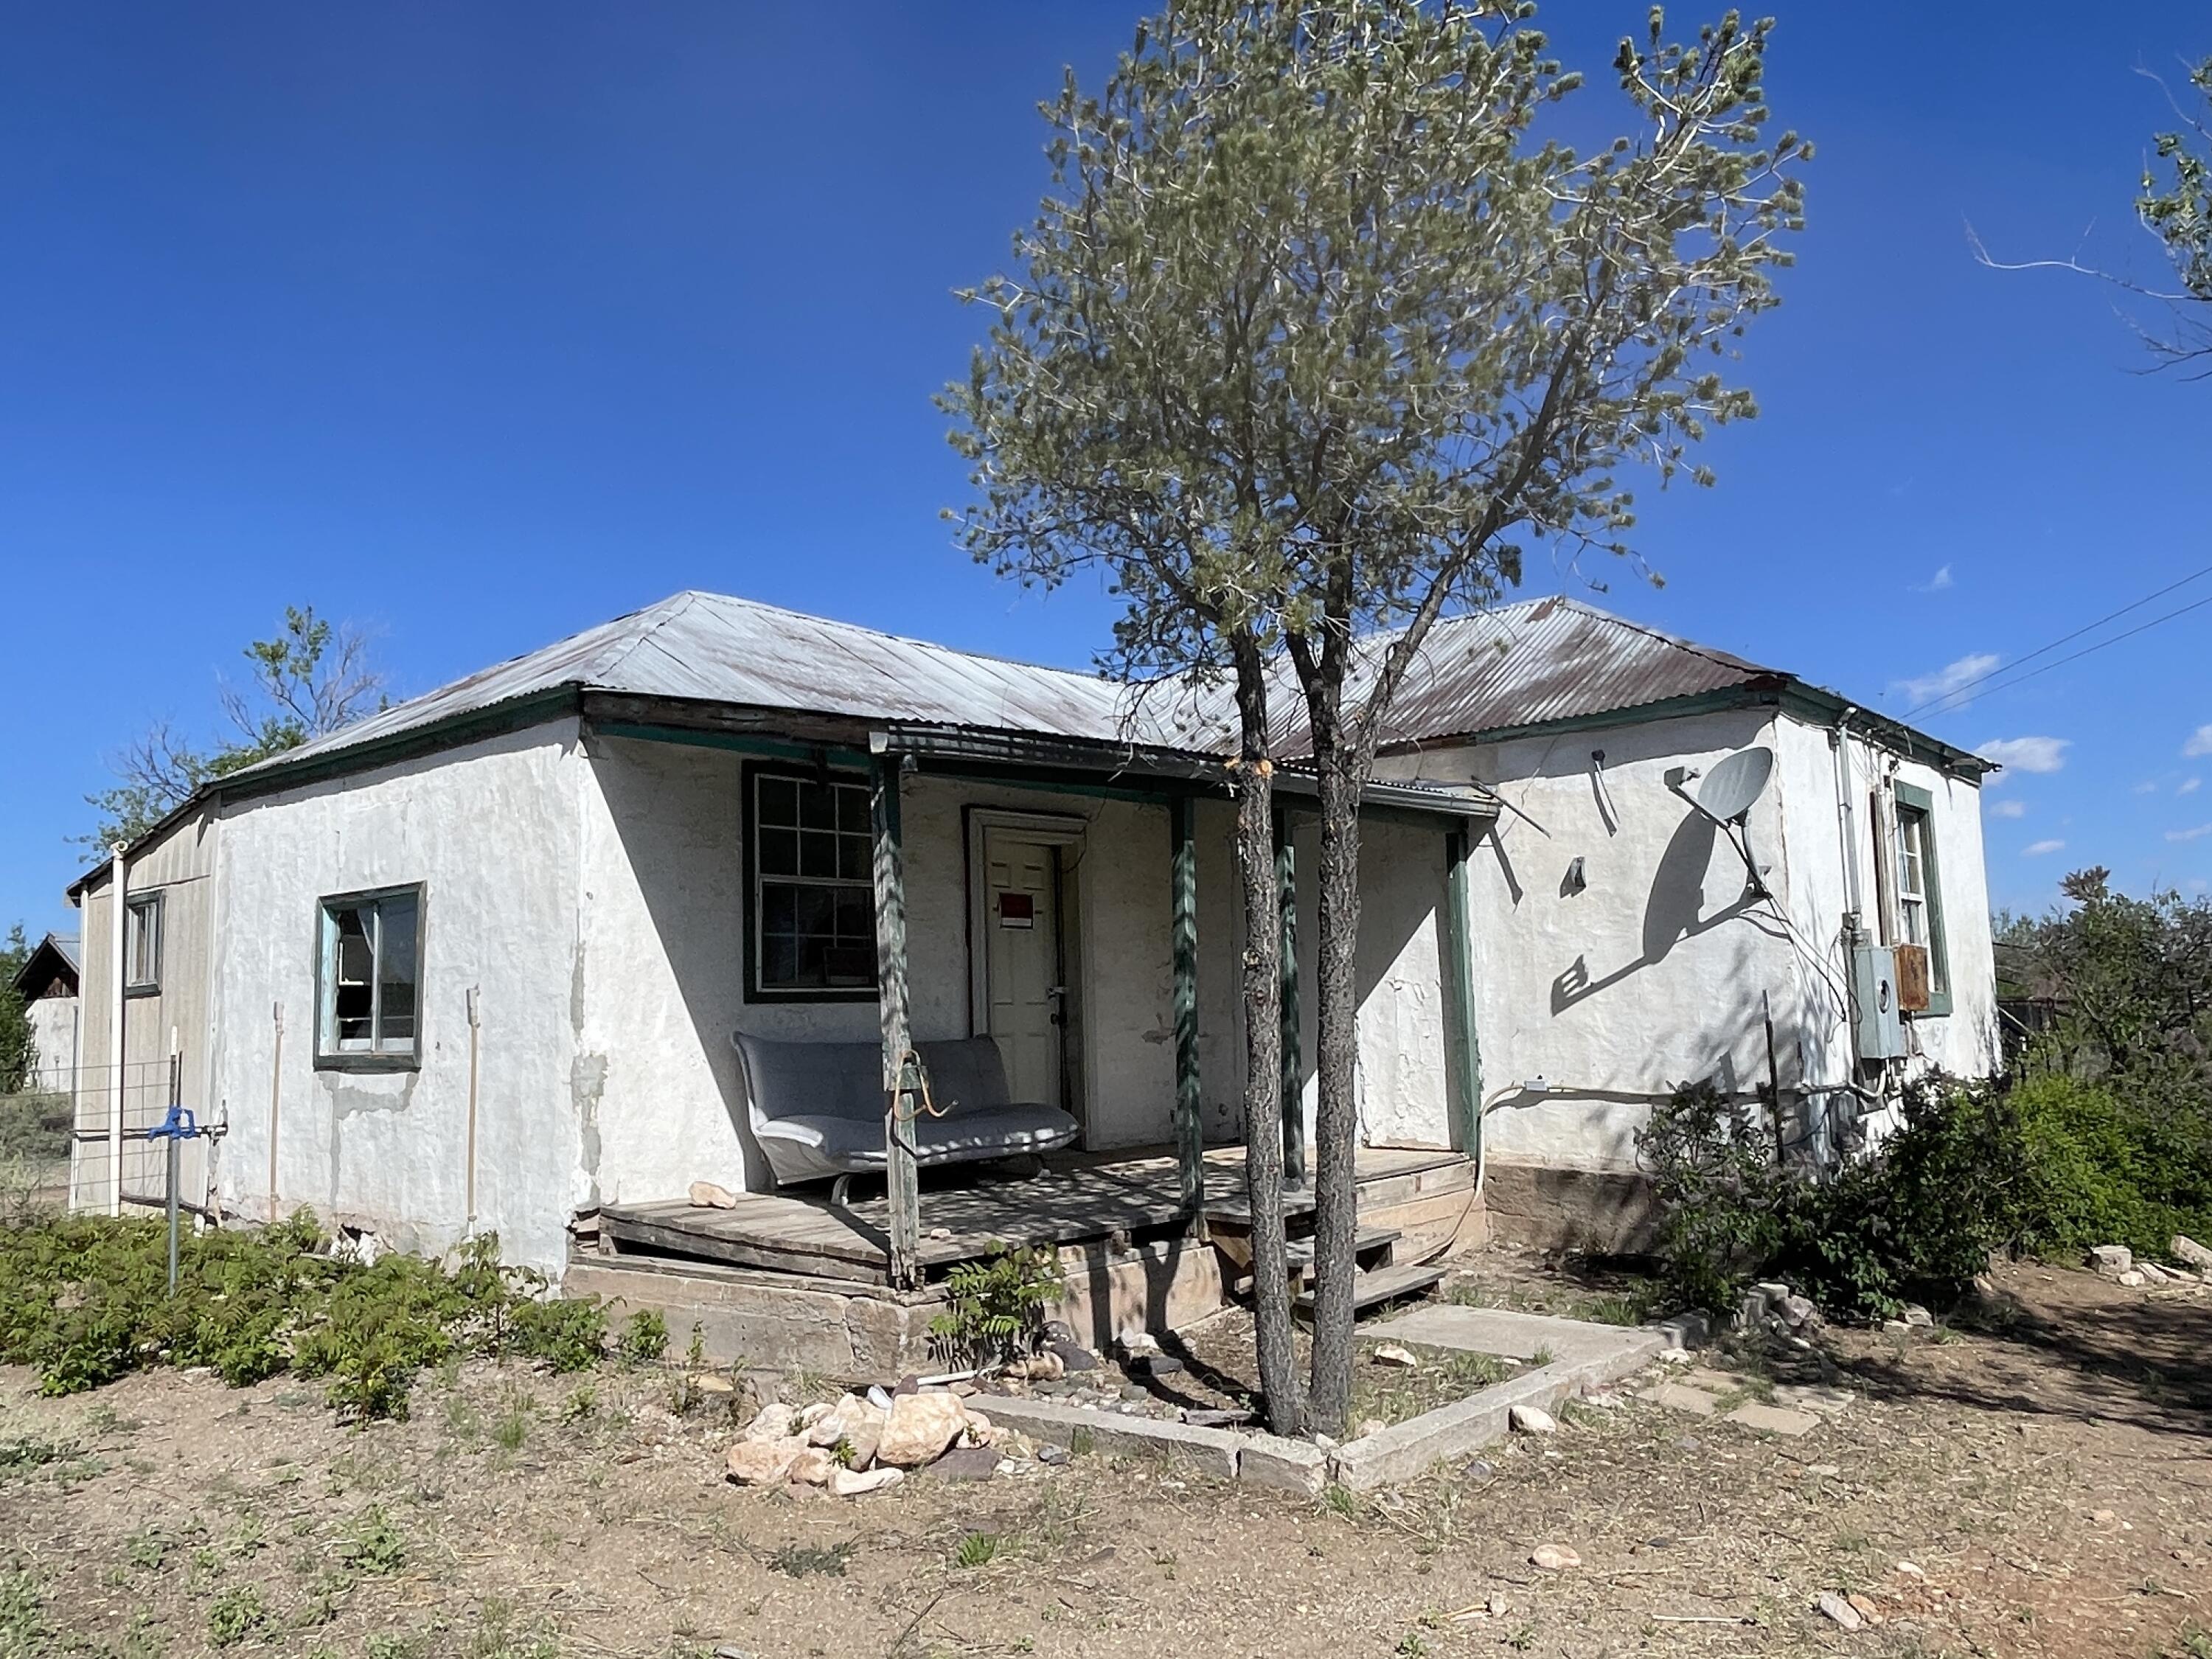 A diamond in the ruff in the historic Village of Magdalena just off of HWY 60  This 900 SF. Adobe Fixer Upper would make the perfect, rental, Airbnb or your forever home in the high desert. Two bedroom, one full size bathroom. Open floorplan in living room and kitchen. Kitchen area has a lot of potential for a spacious workable cooking area. Out building would be a perfect spot for an art studio or workshop.  Fantastic New Mexico sunsets and dark starry skies. Enjoy the majestic mountainous views of the Magdalena Mountains!  Additional lots to the west can be purchased with this property, Come and make this gem yours today! Won't last long! Call for a tour today!